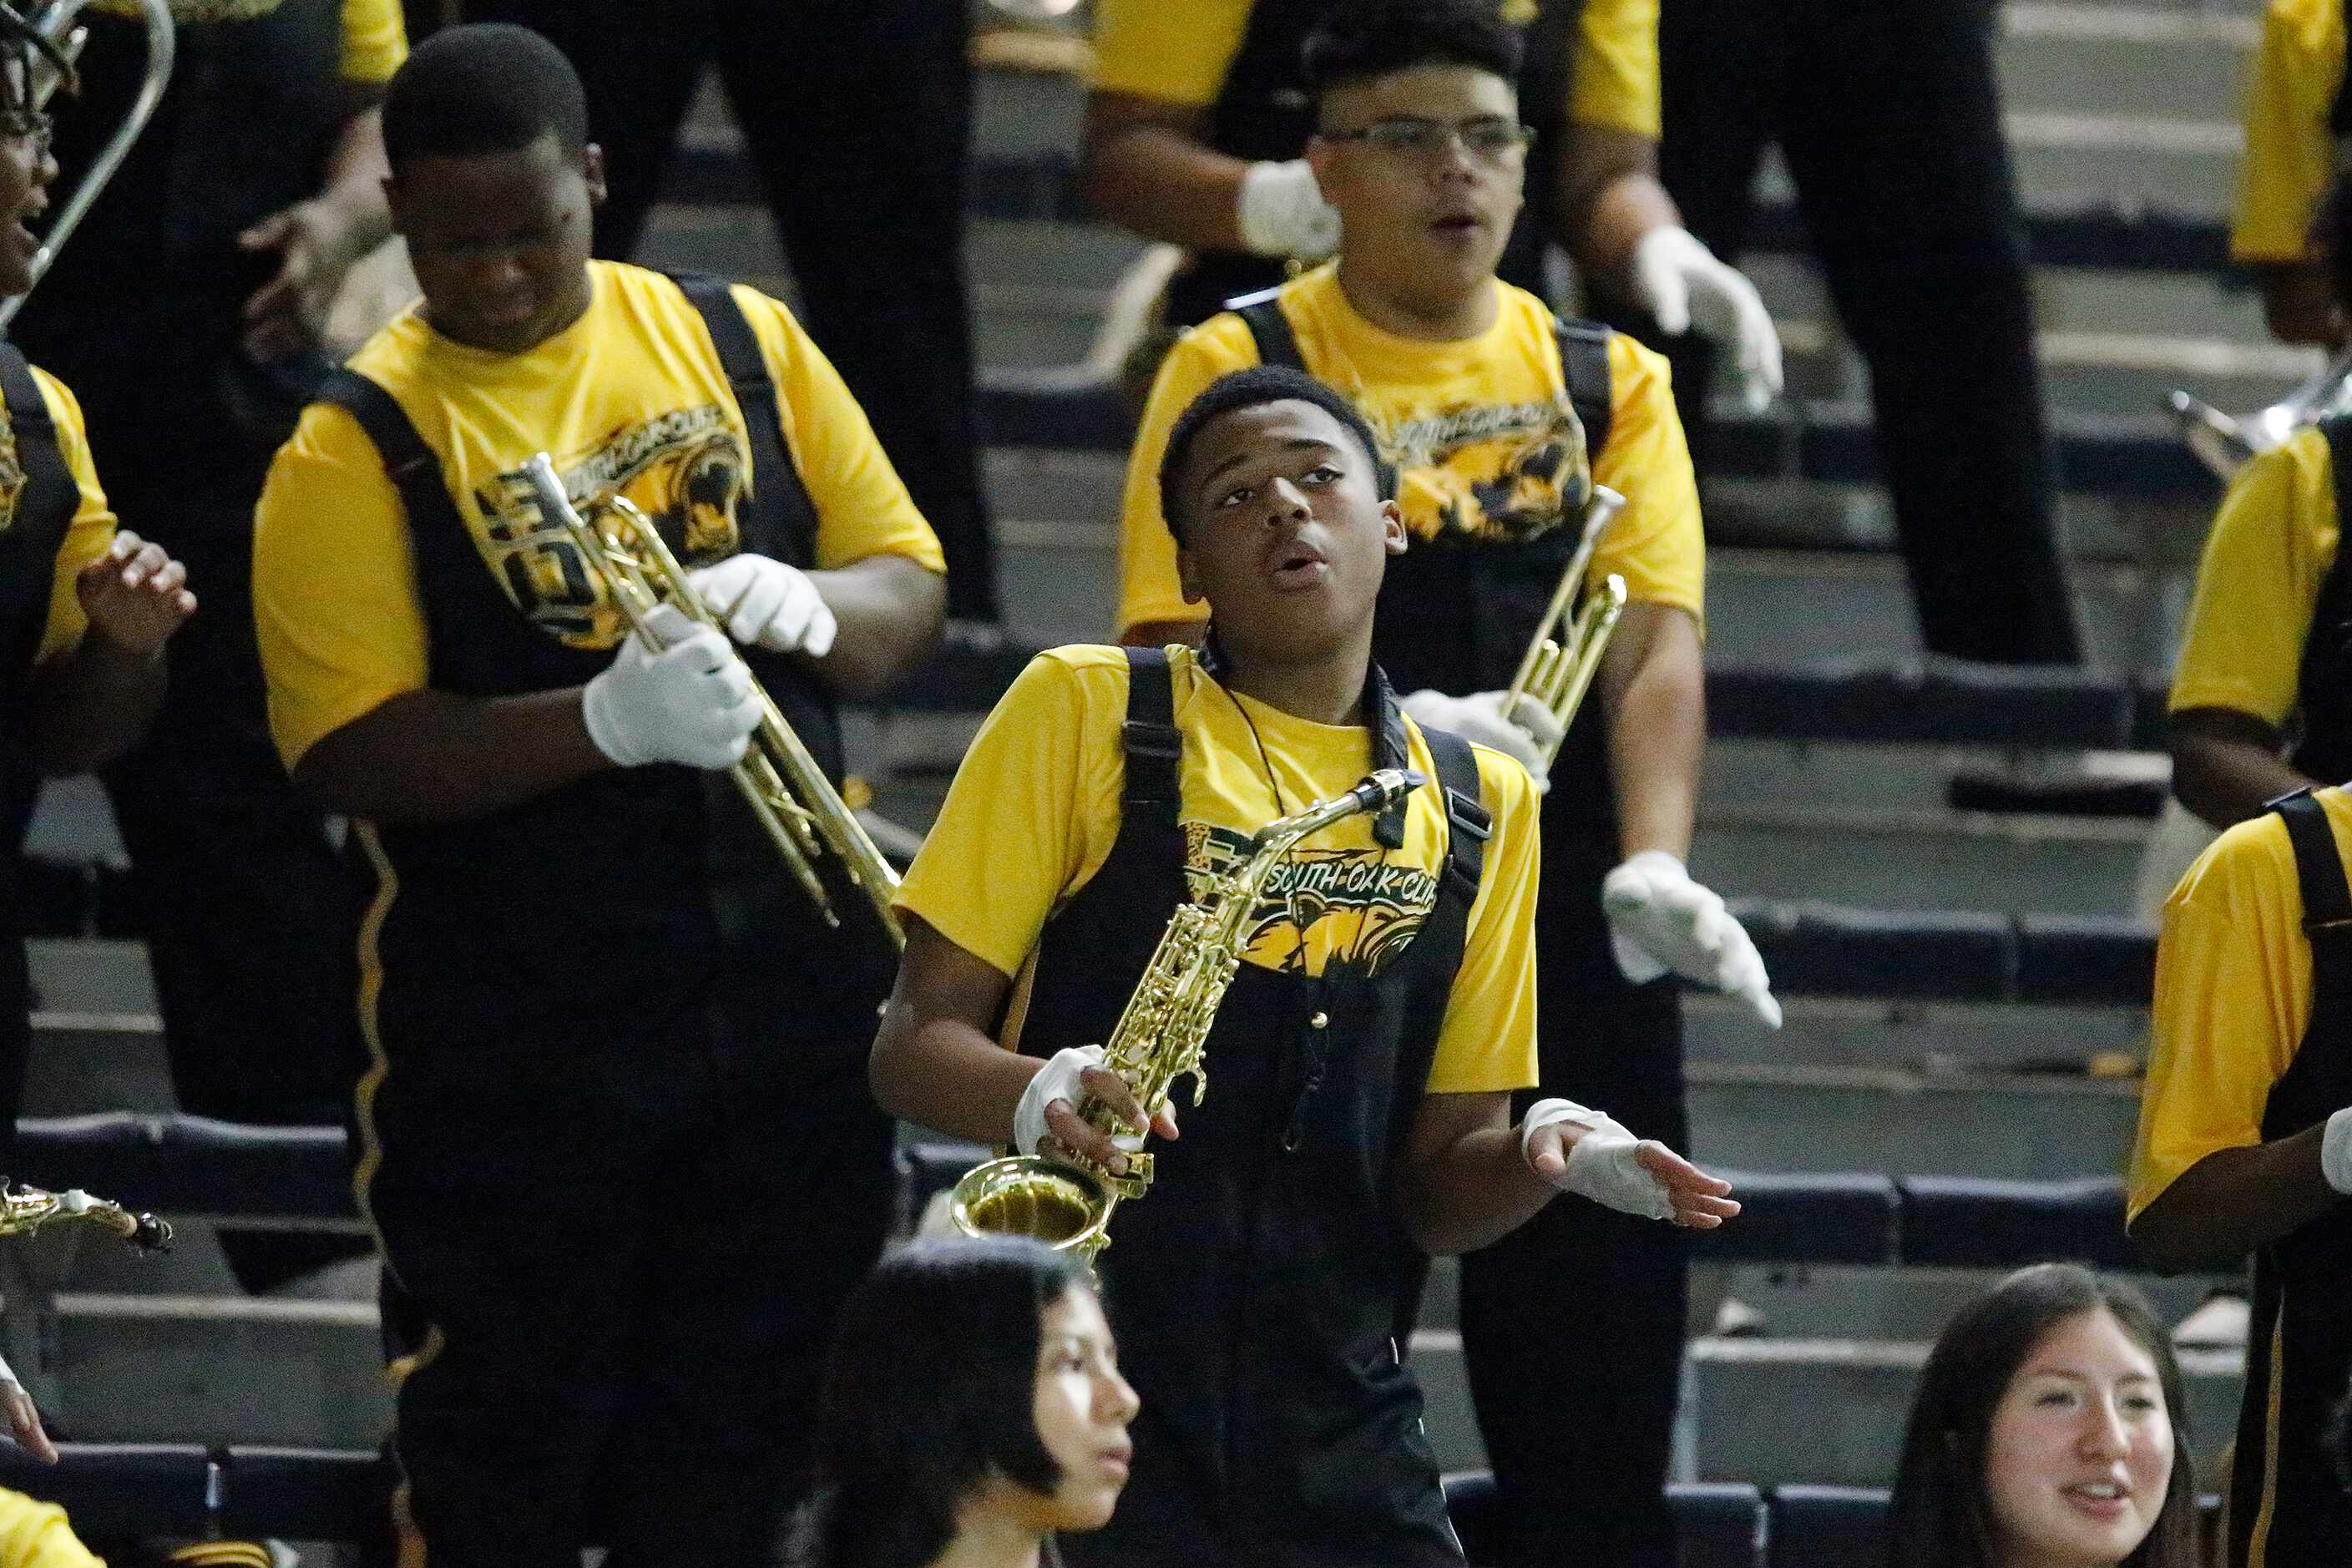 The South Oak Cliff High School band was coasting on a big lead during the first half as...